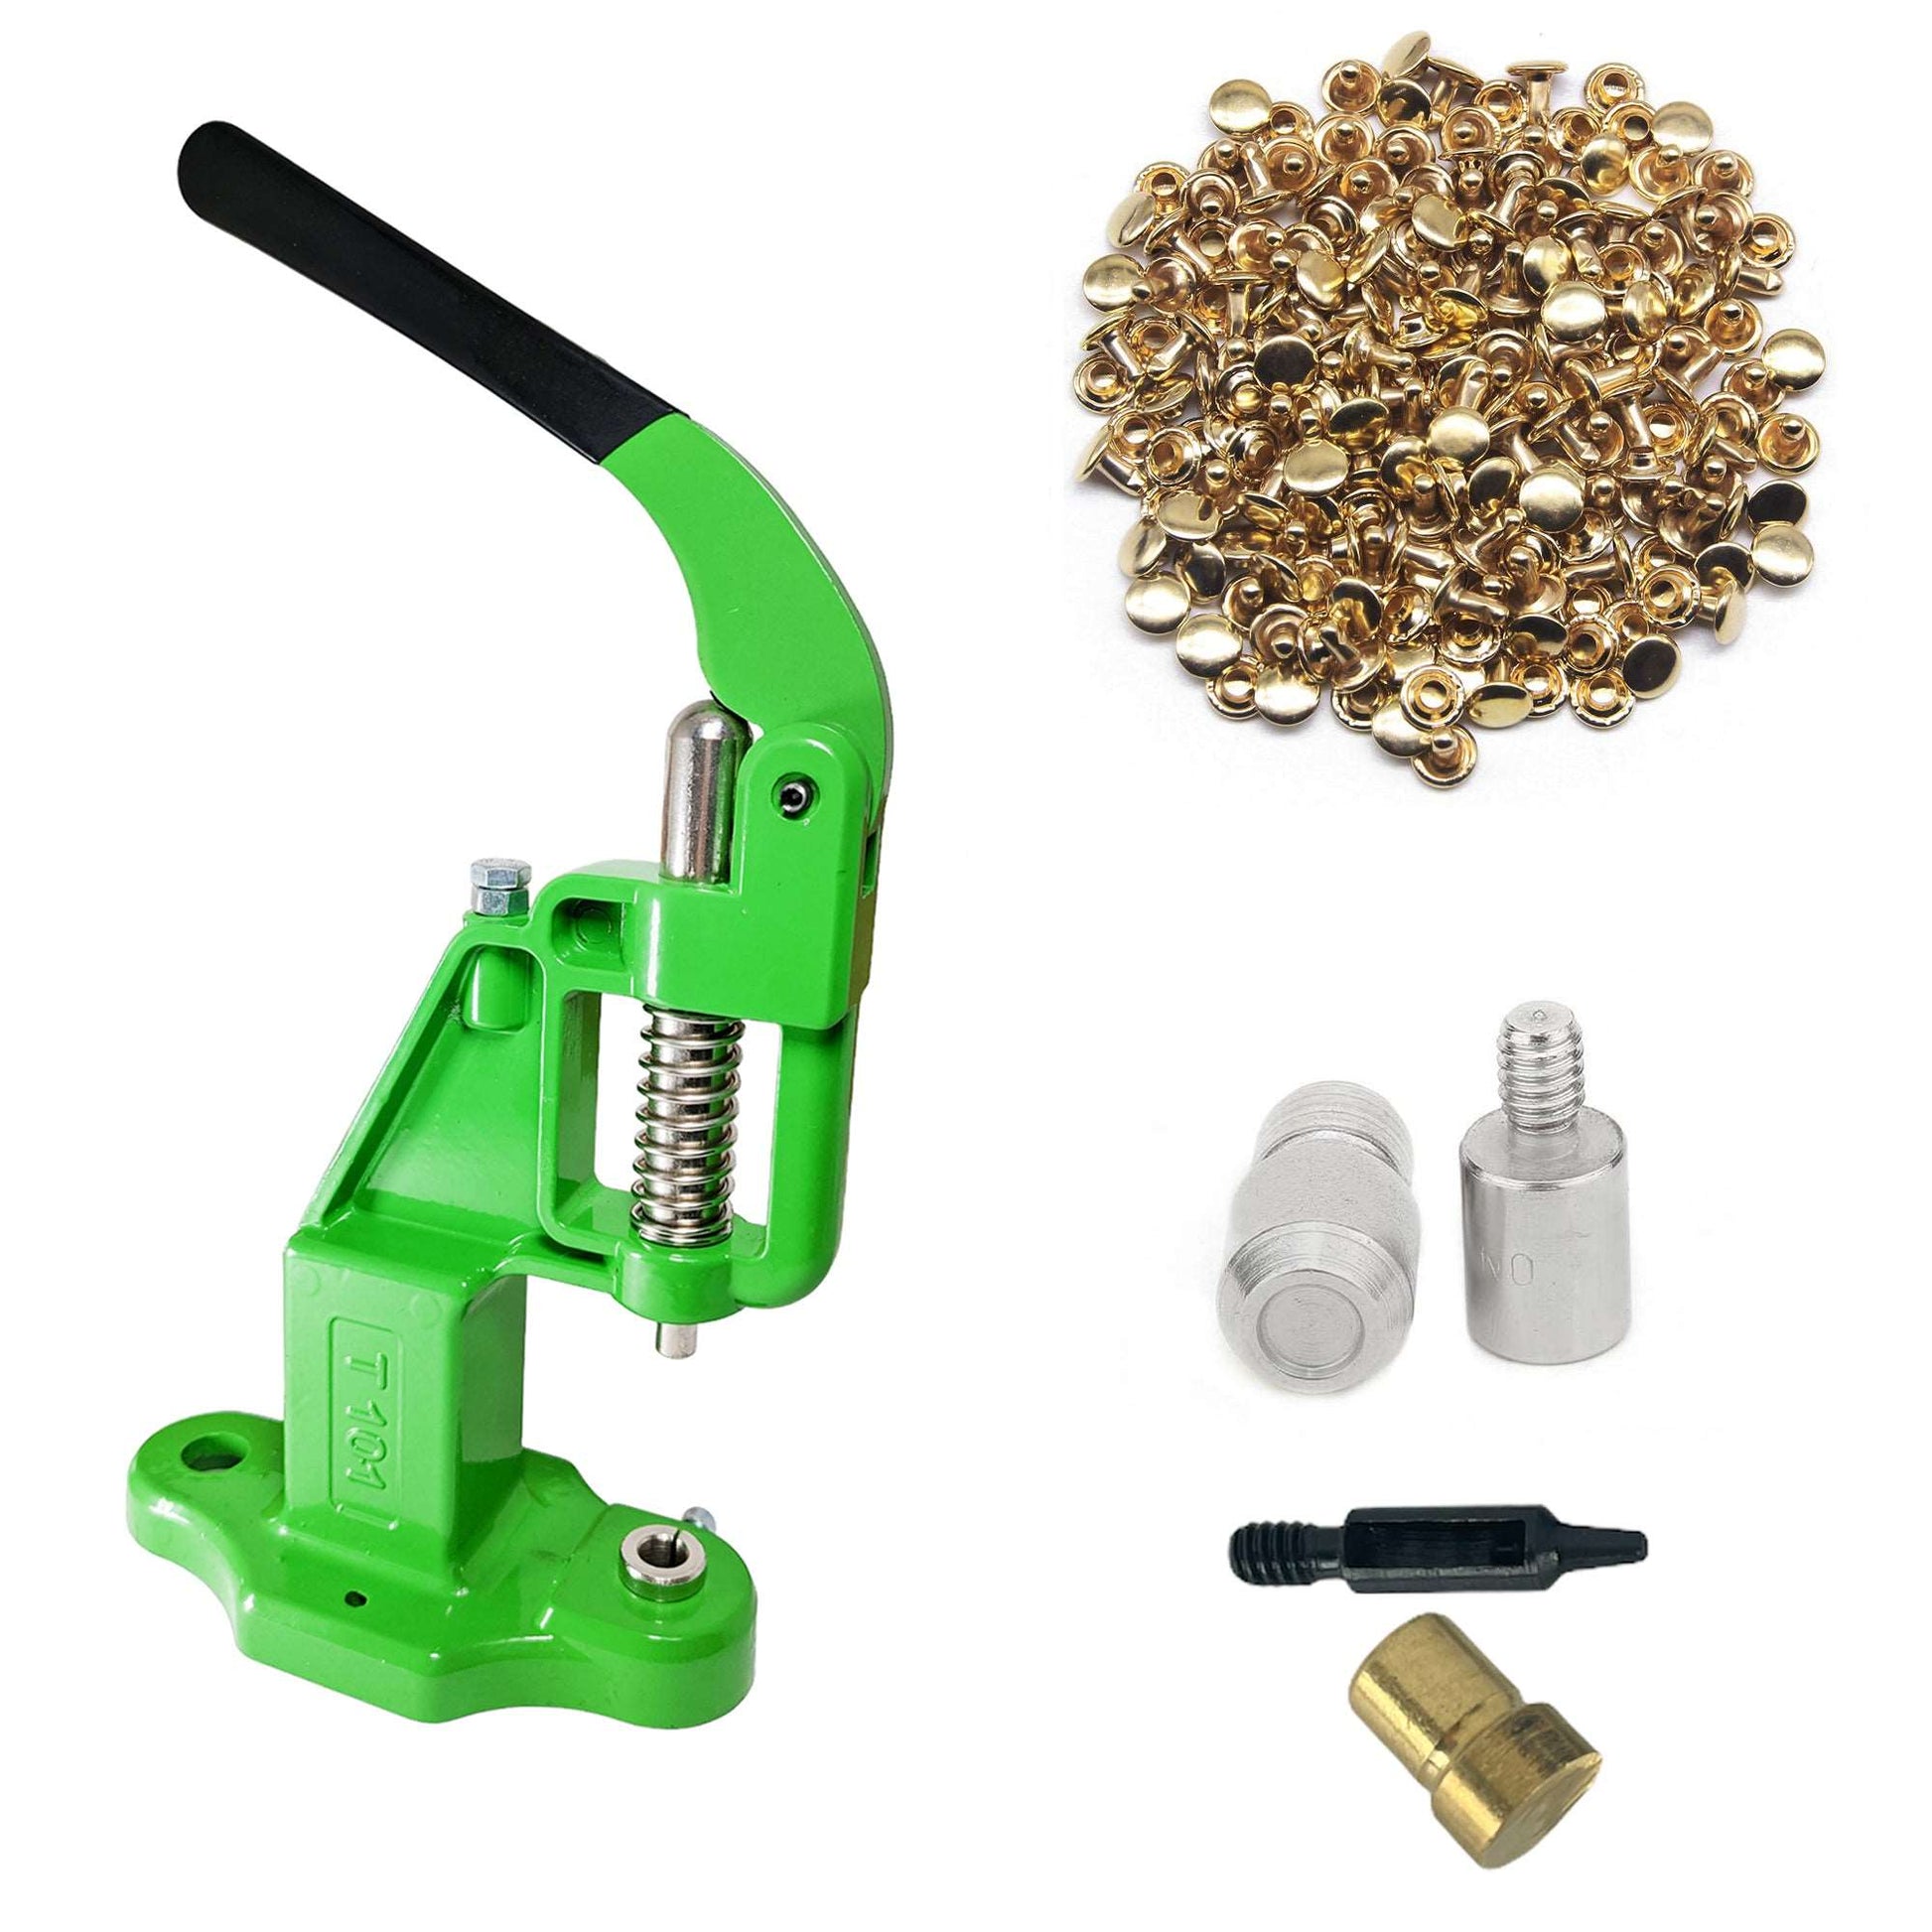 Double Cap 9mm Rivets Kit (1000 pcs) with Hand Press Machine, Dies and Hole Punch